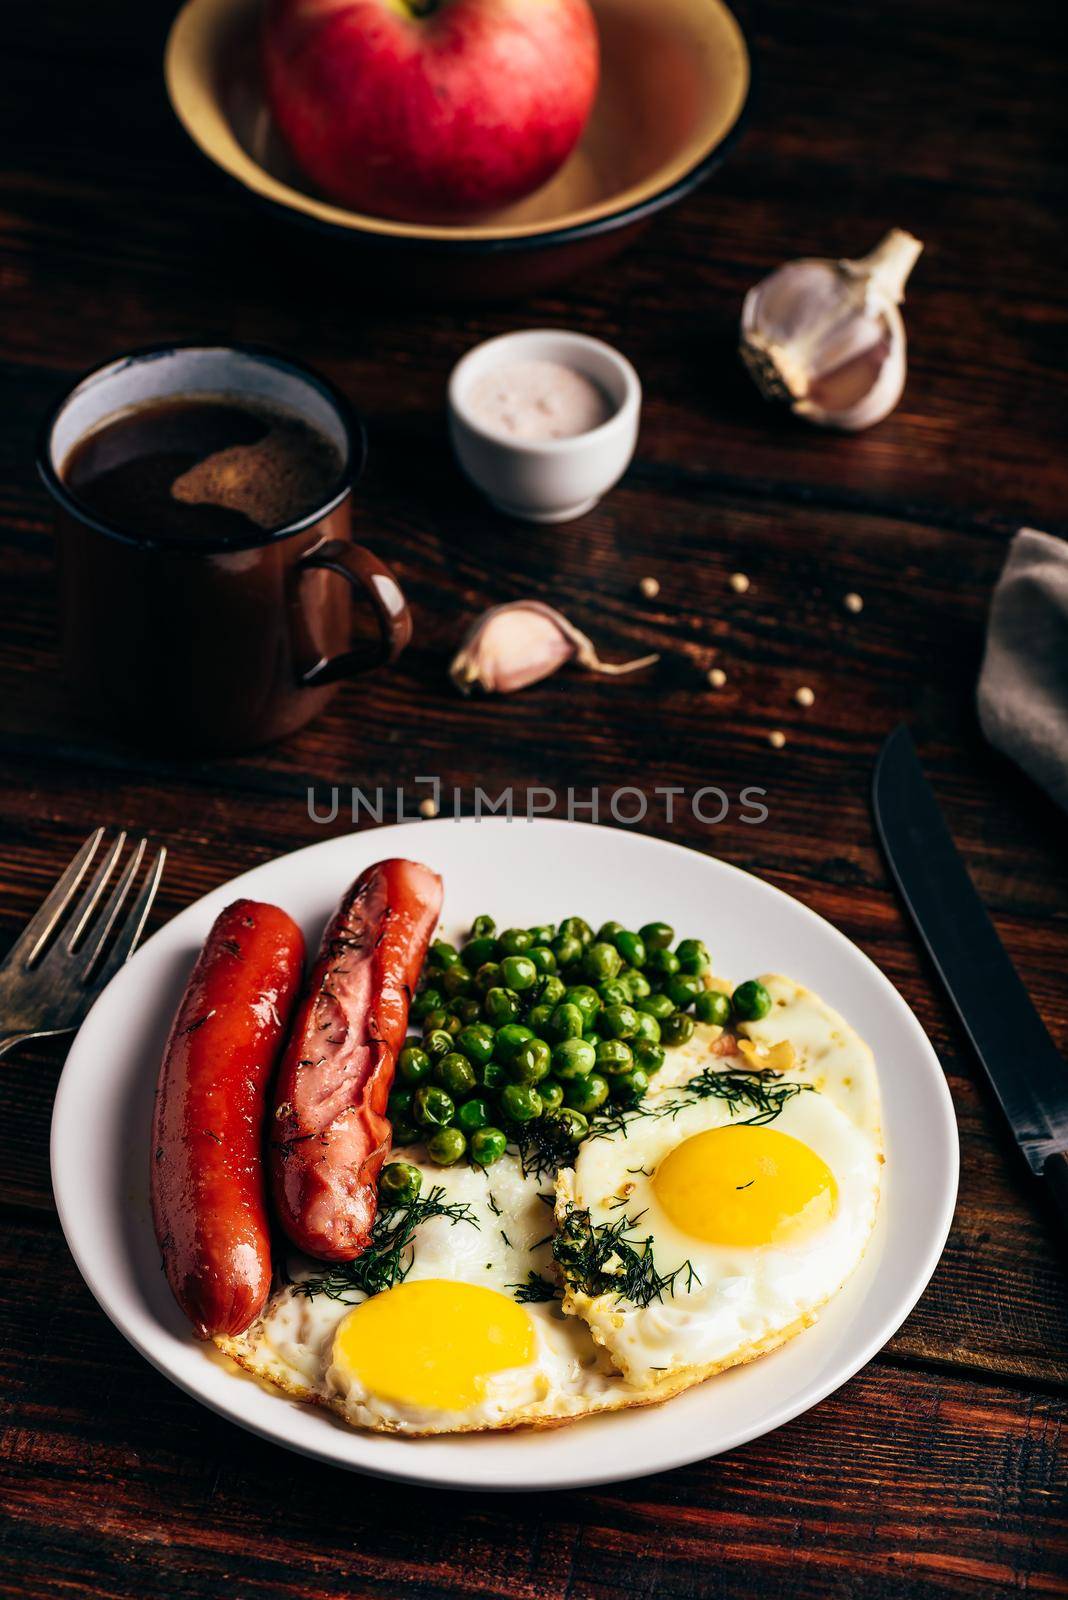 Breakfast with fried eggs, sausages and green peas by Seva_blsv